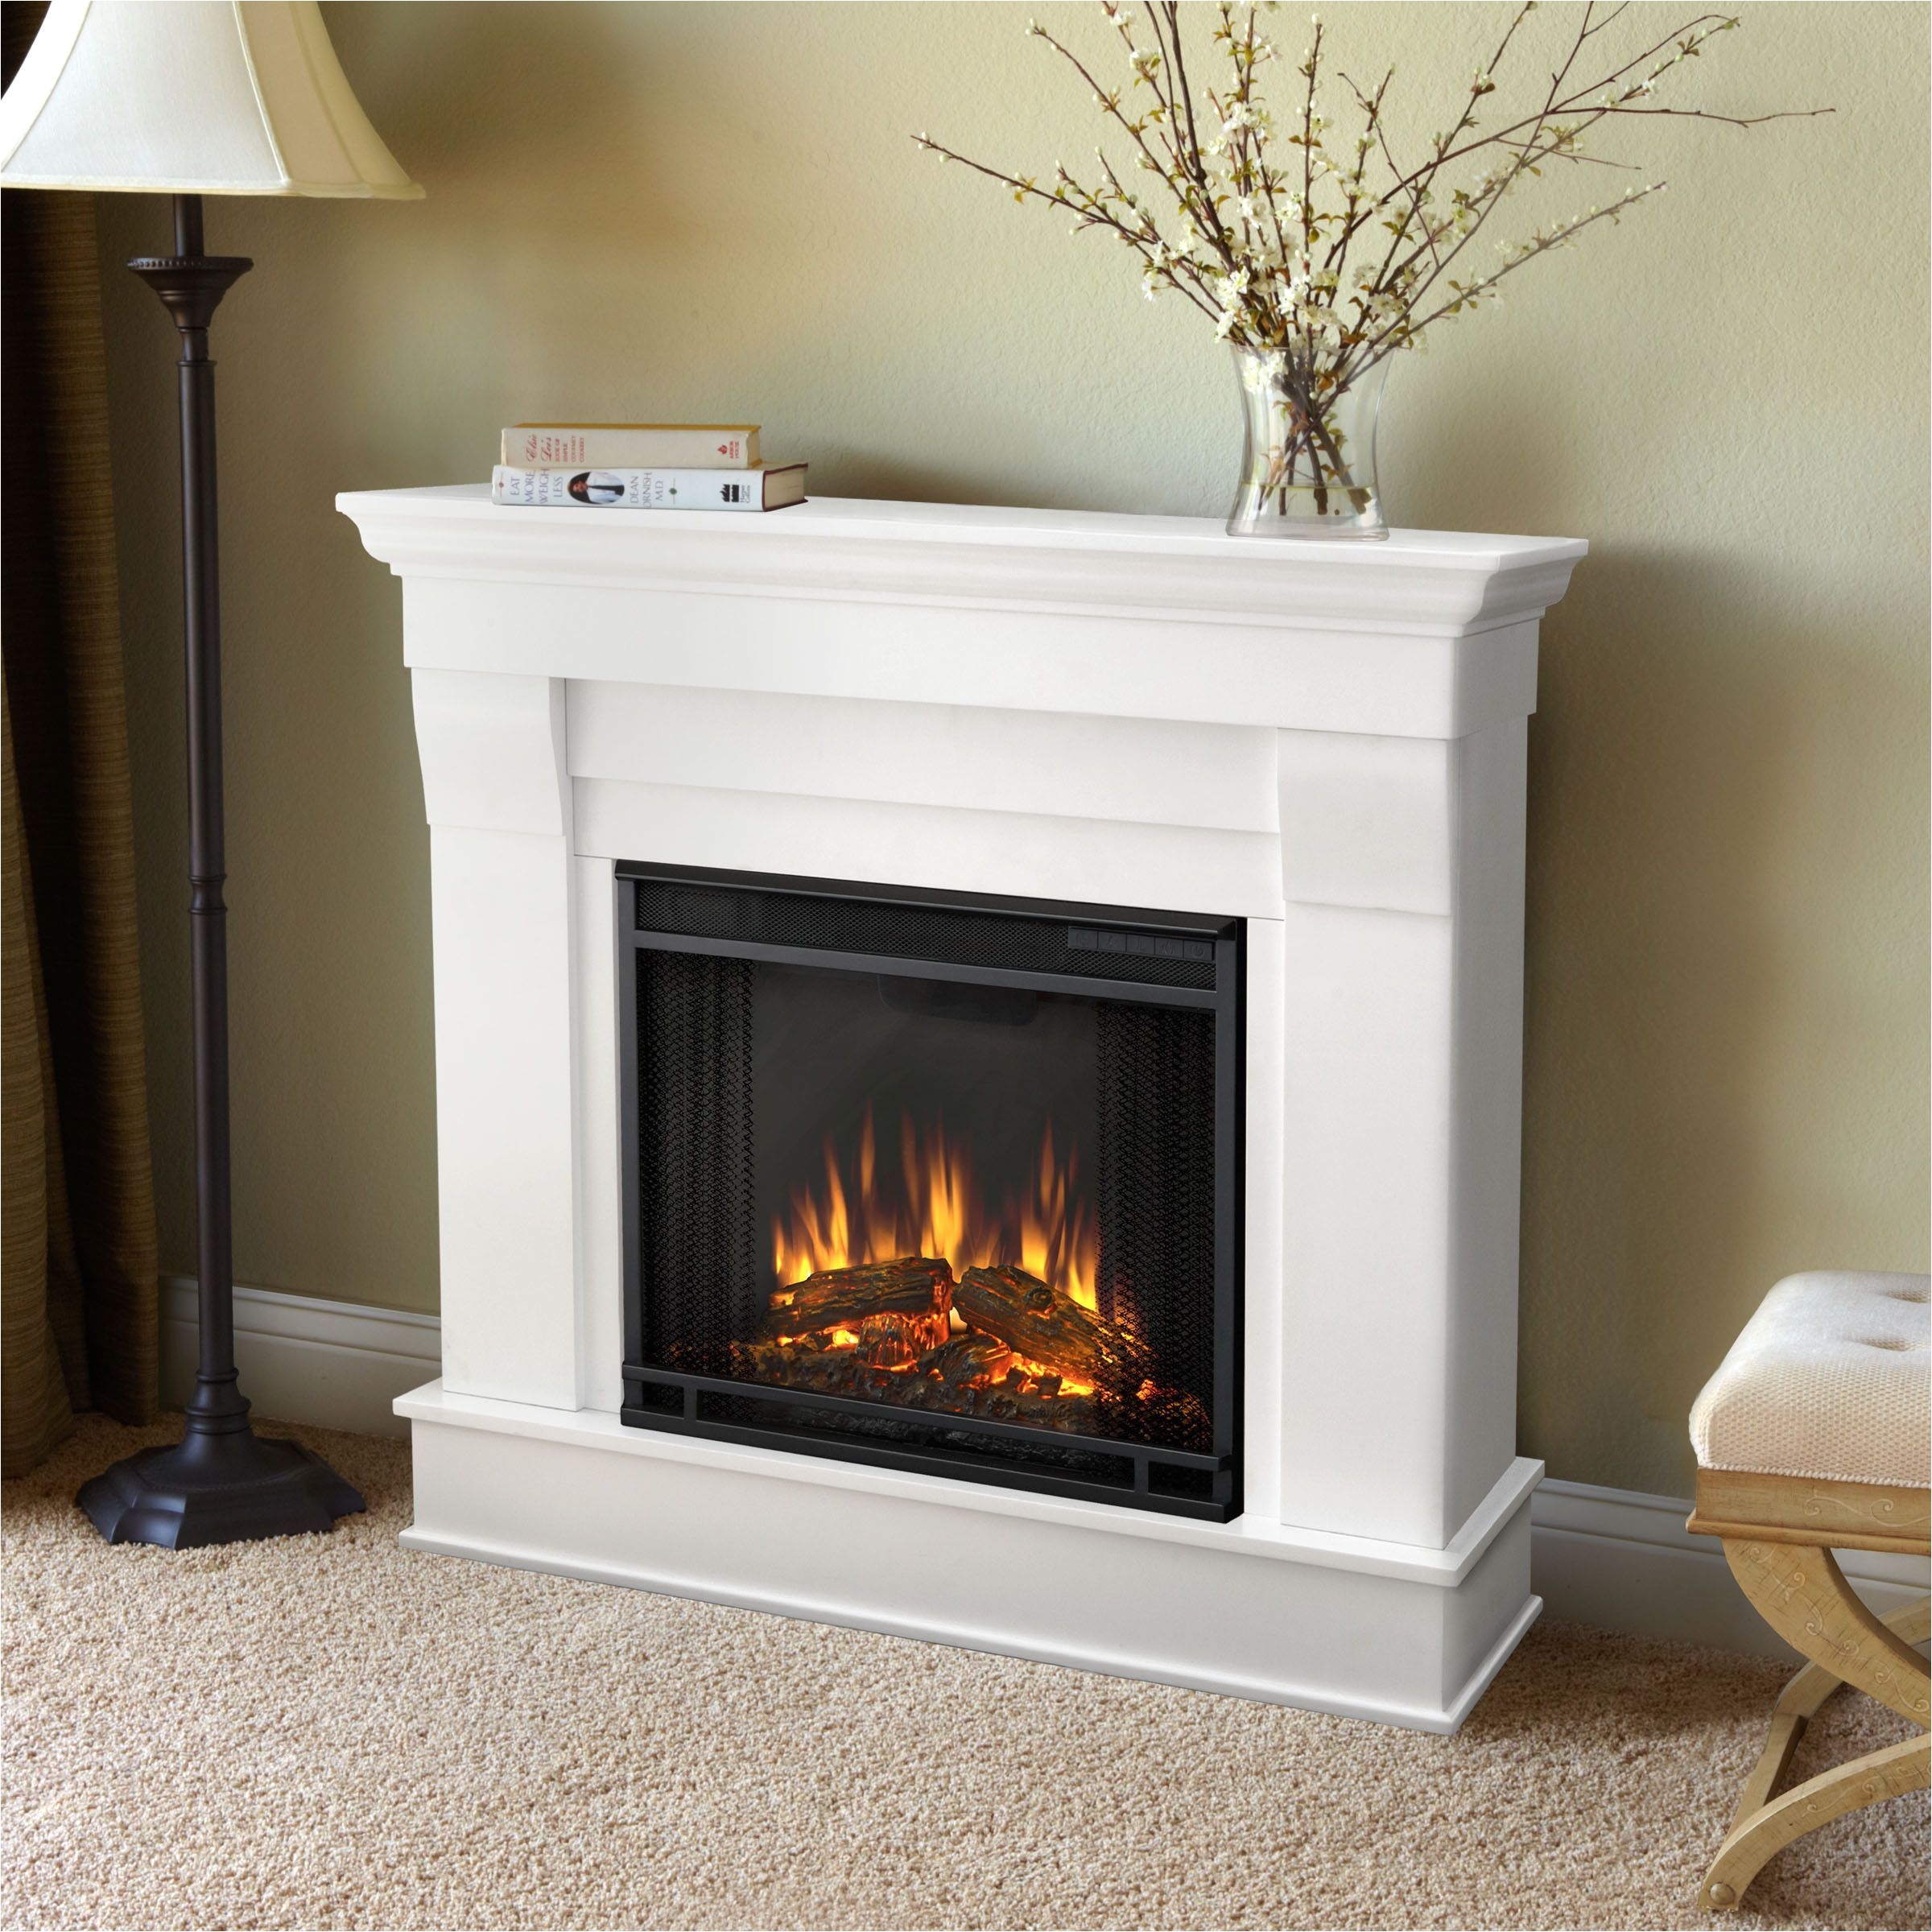 fake fire picture for fireplace real flame chateau electric fireplace fireplaces and surrounds of fake fire picture for fireplace